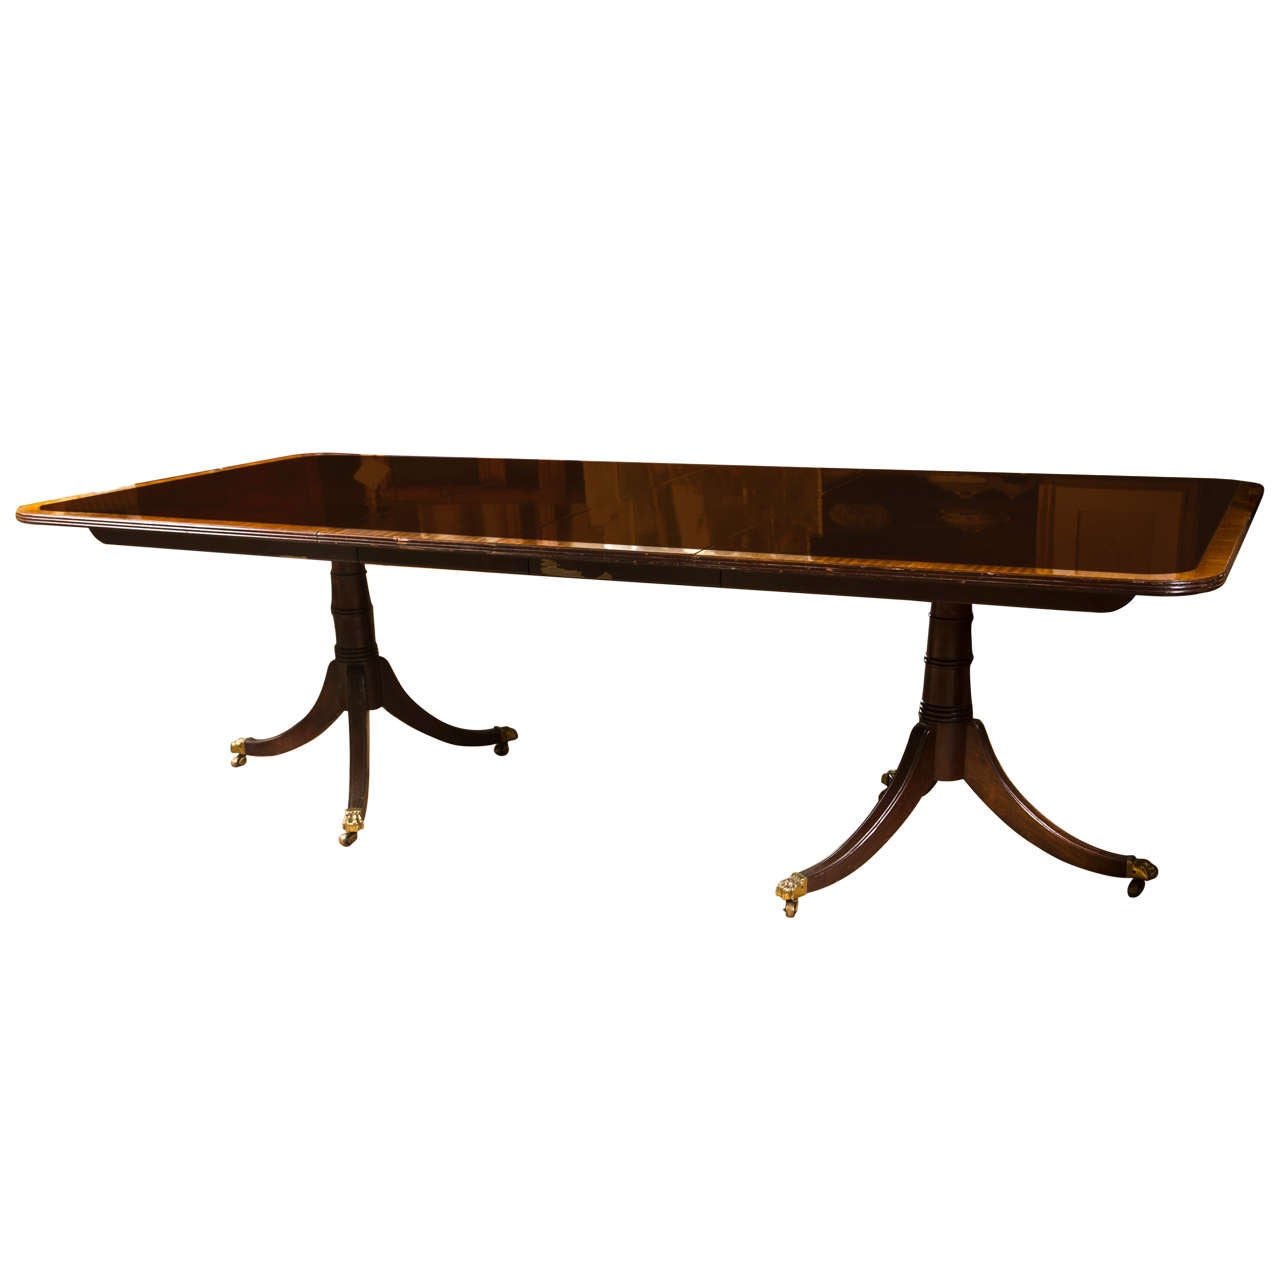 Regency Style Banded Mahogany Dining Table by Stickley